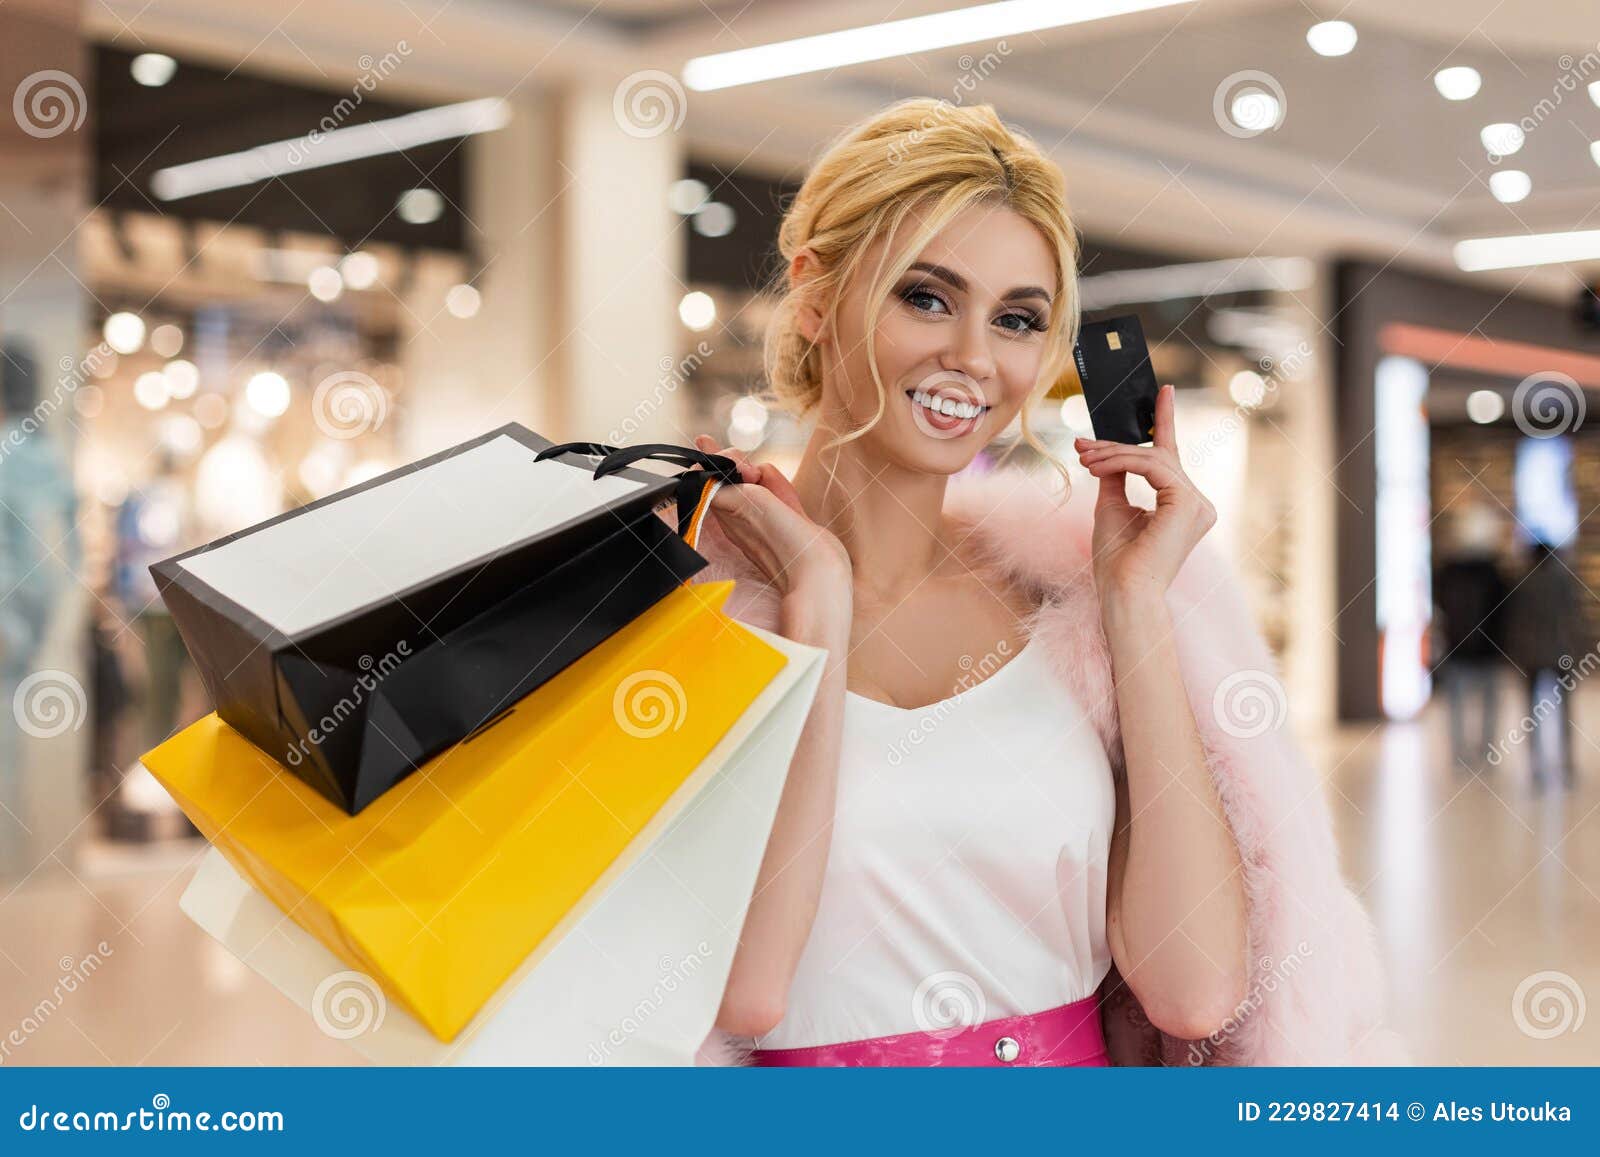 Woman with Smile in Luxurious Pink Fur Coat with Shopping Bags Holds a ...